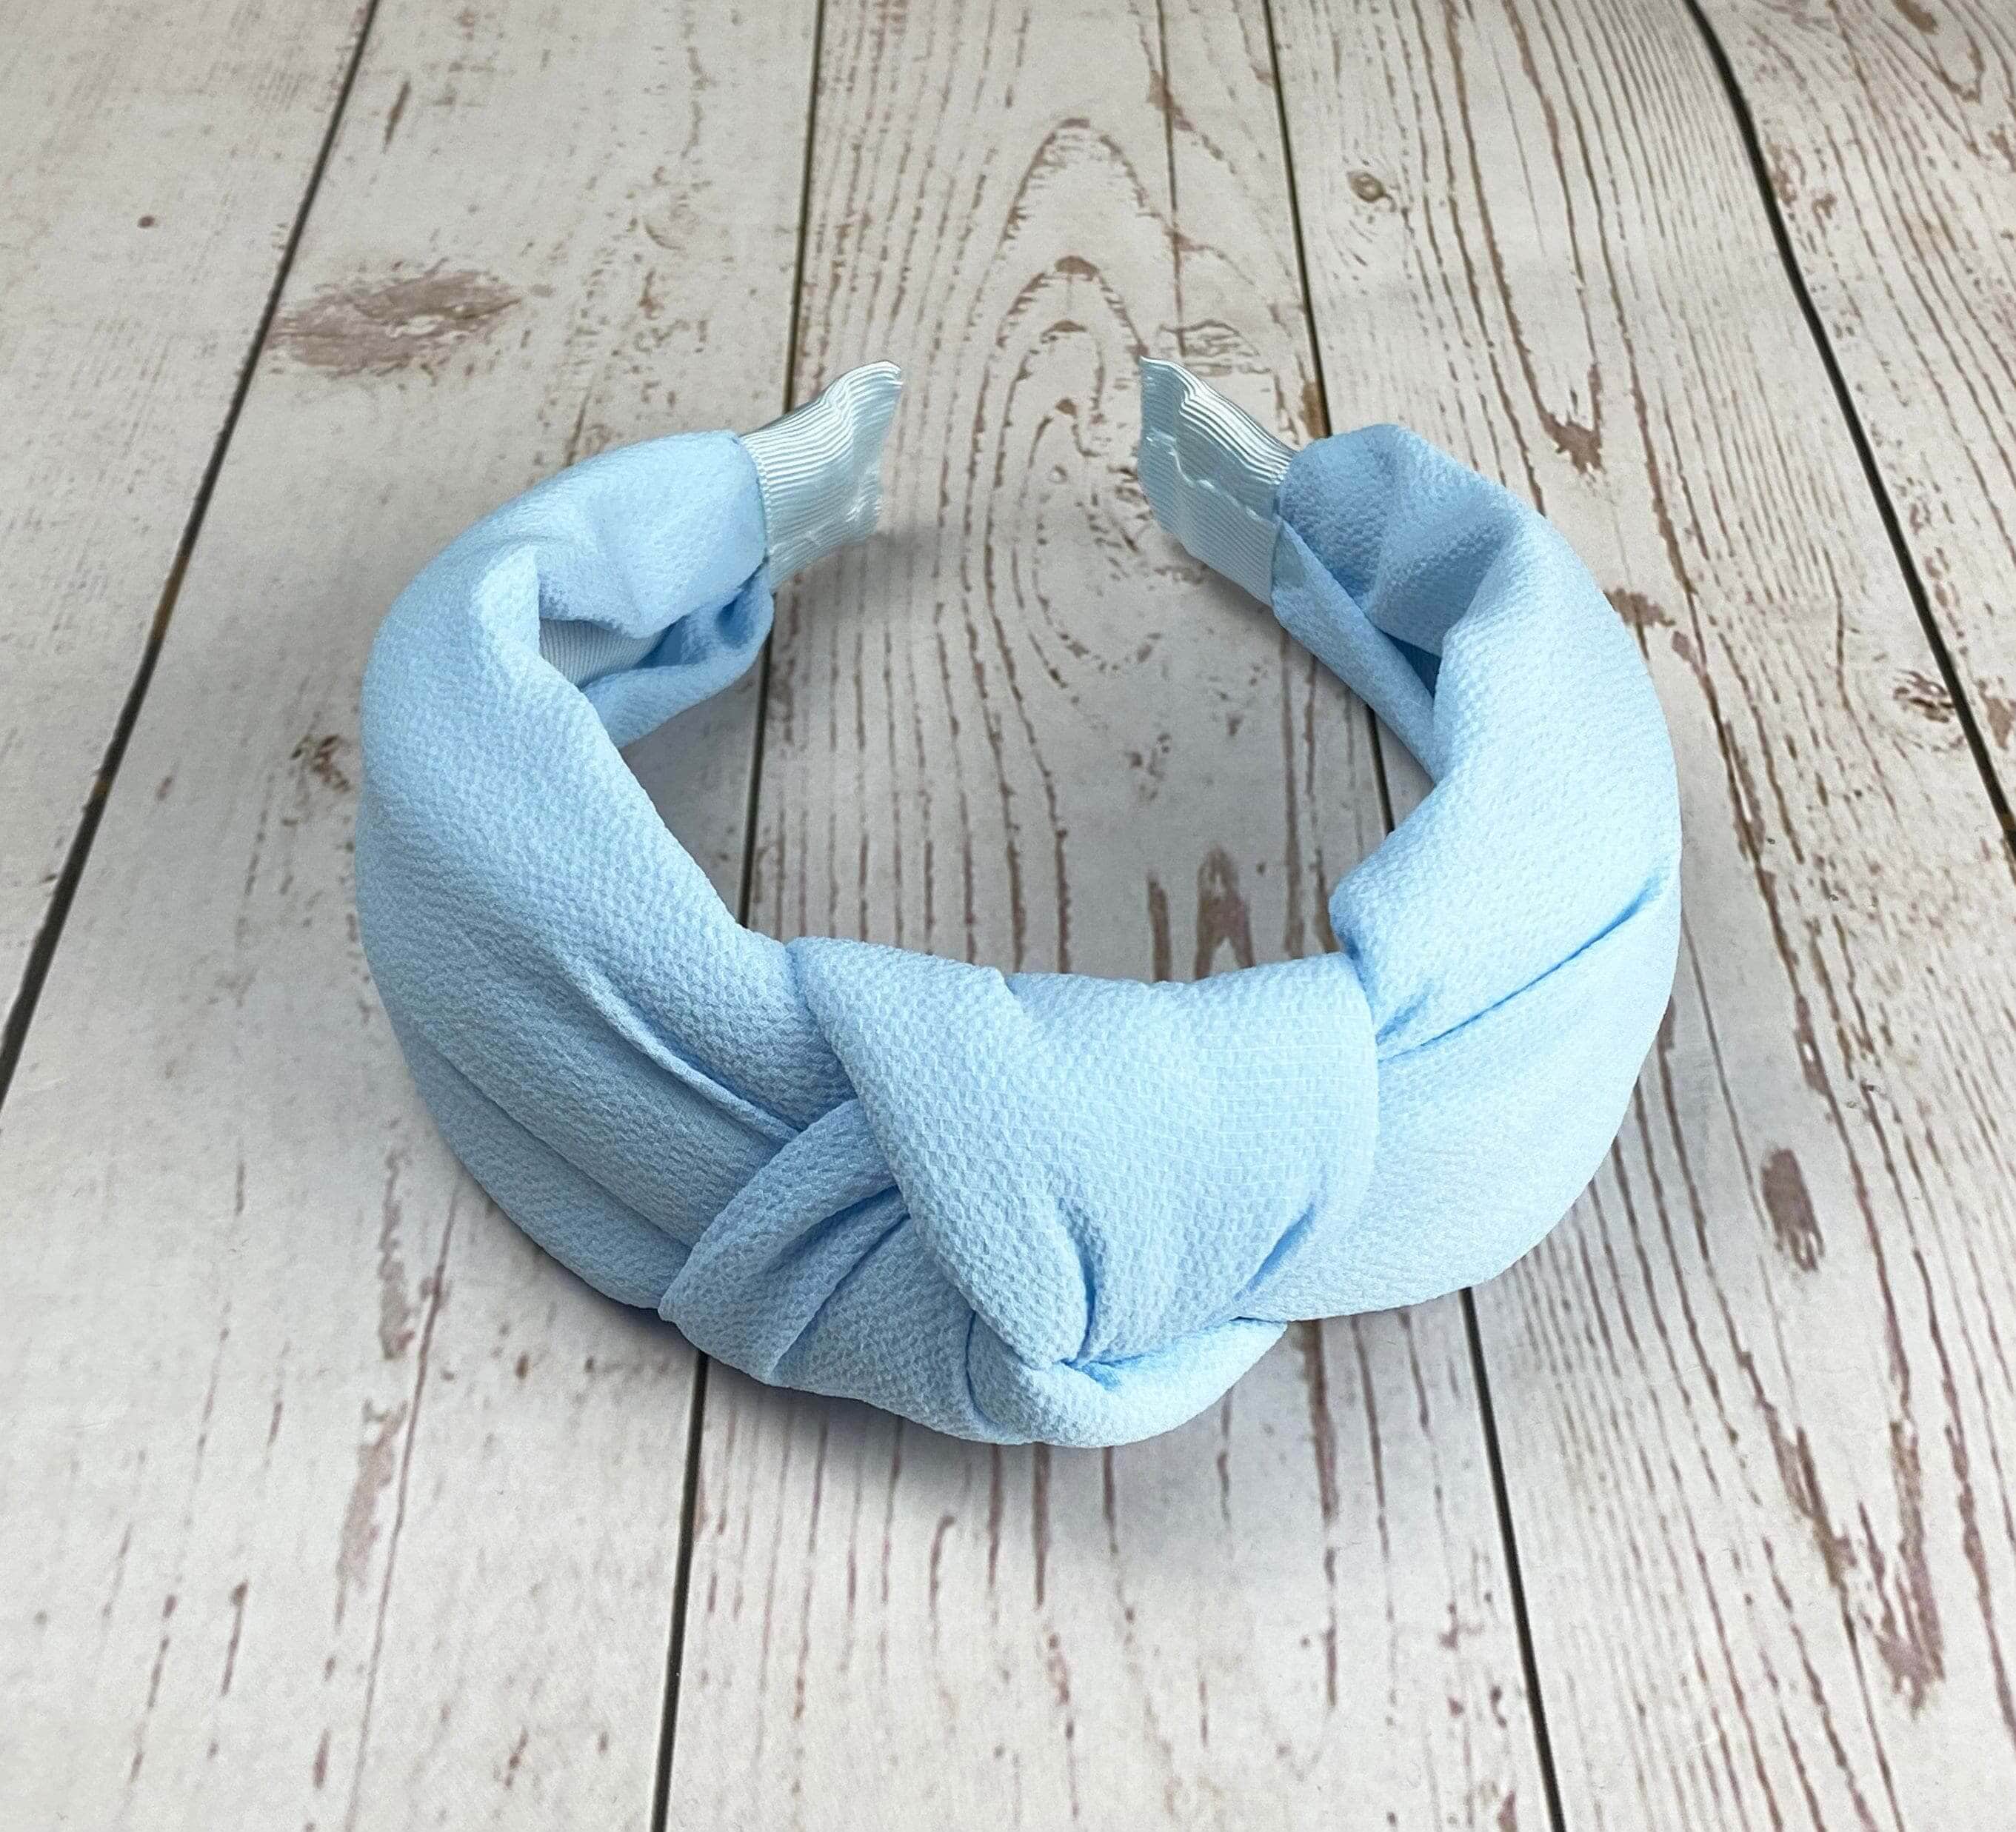 Stay comfortable and stylish with this baby blue twist knot headband, made from soft viscose crepe material and padded for extra comfort.